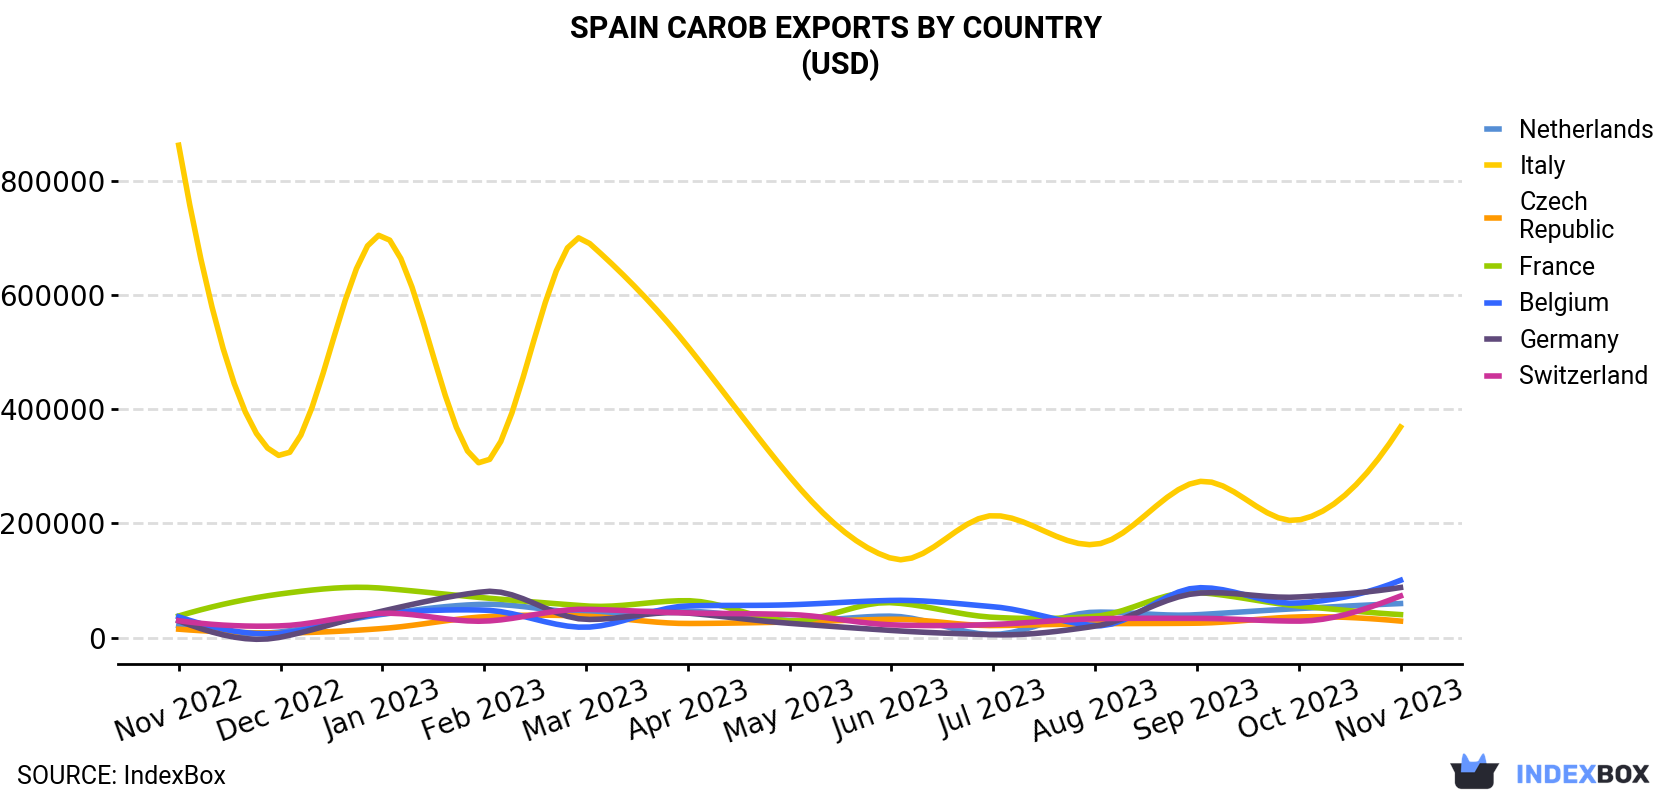 Spain Carob Exports By Country (USD)